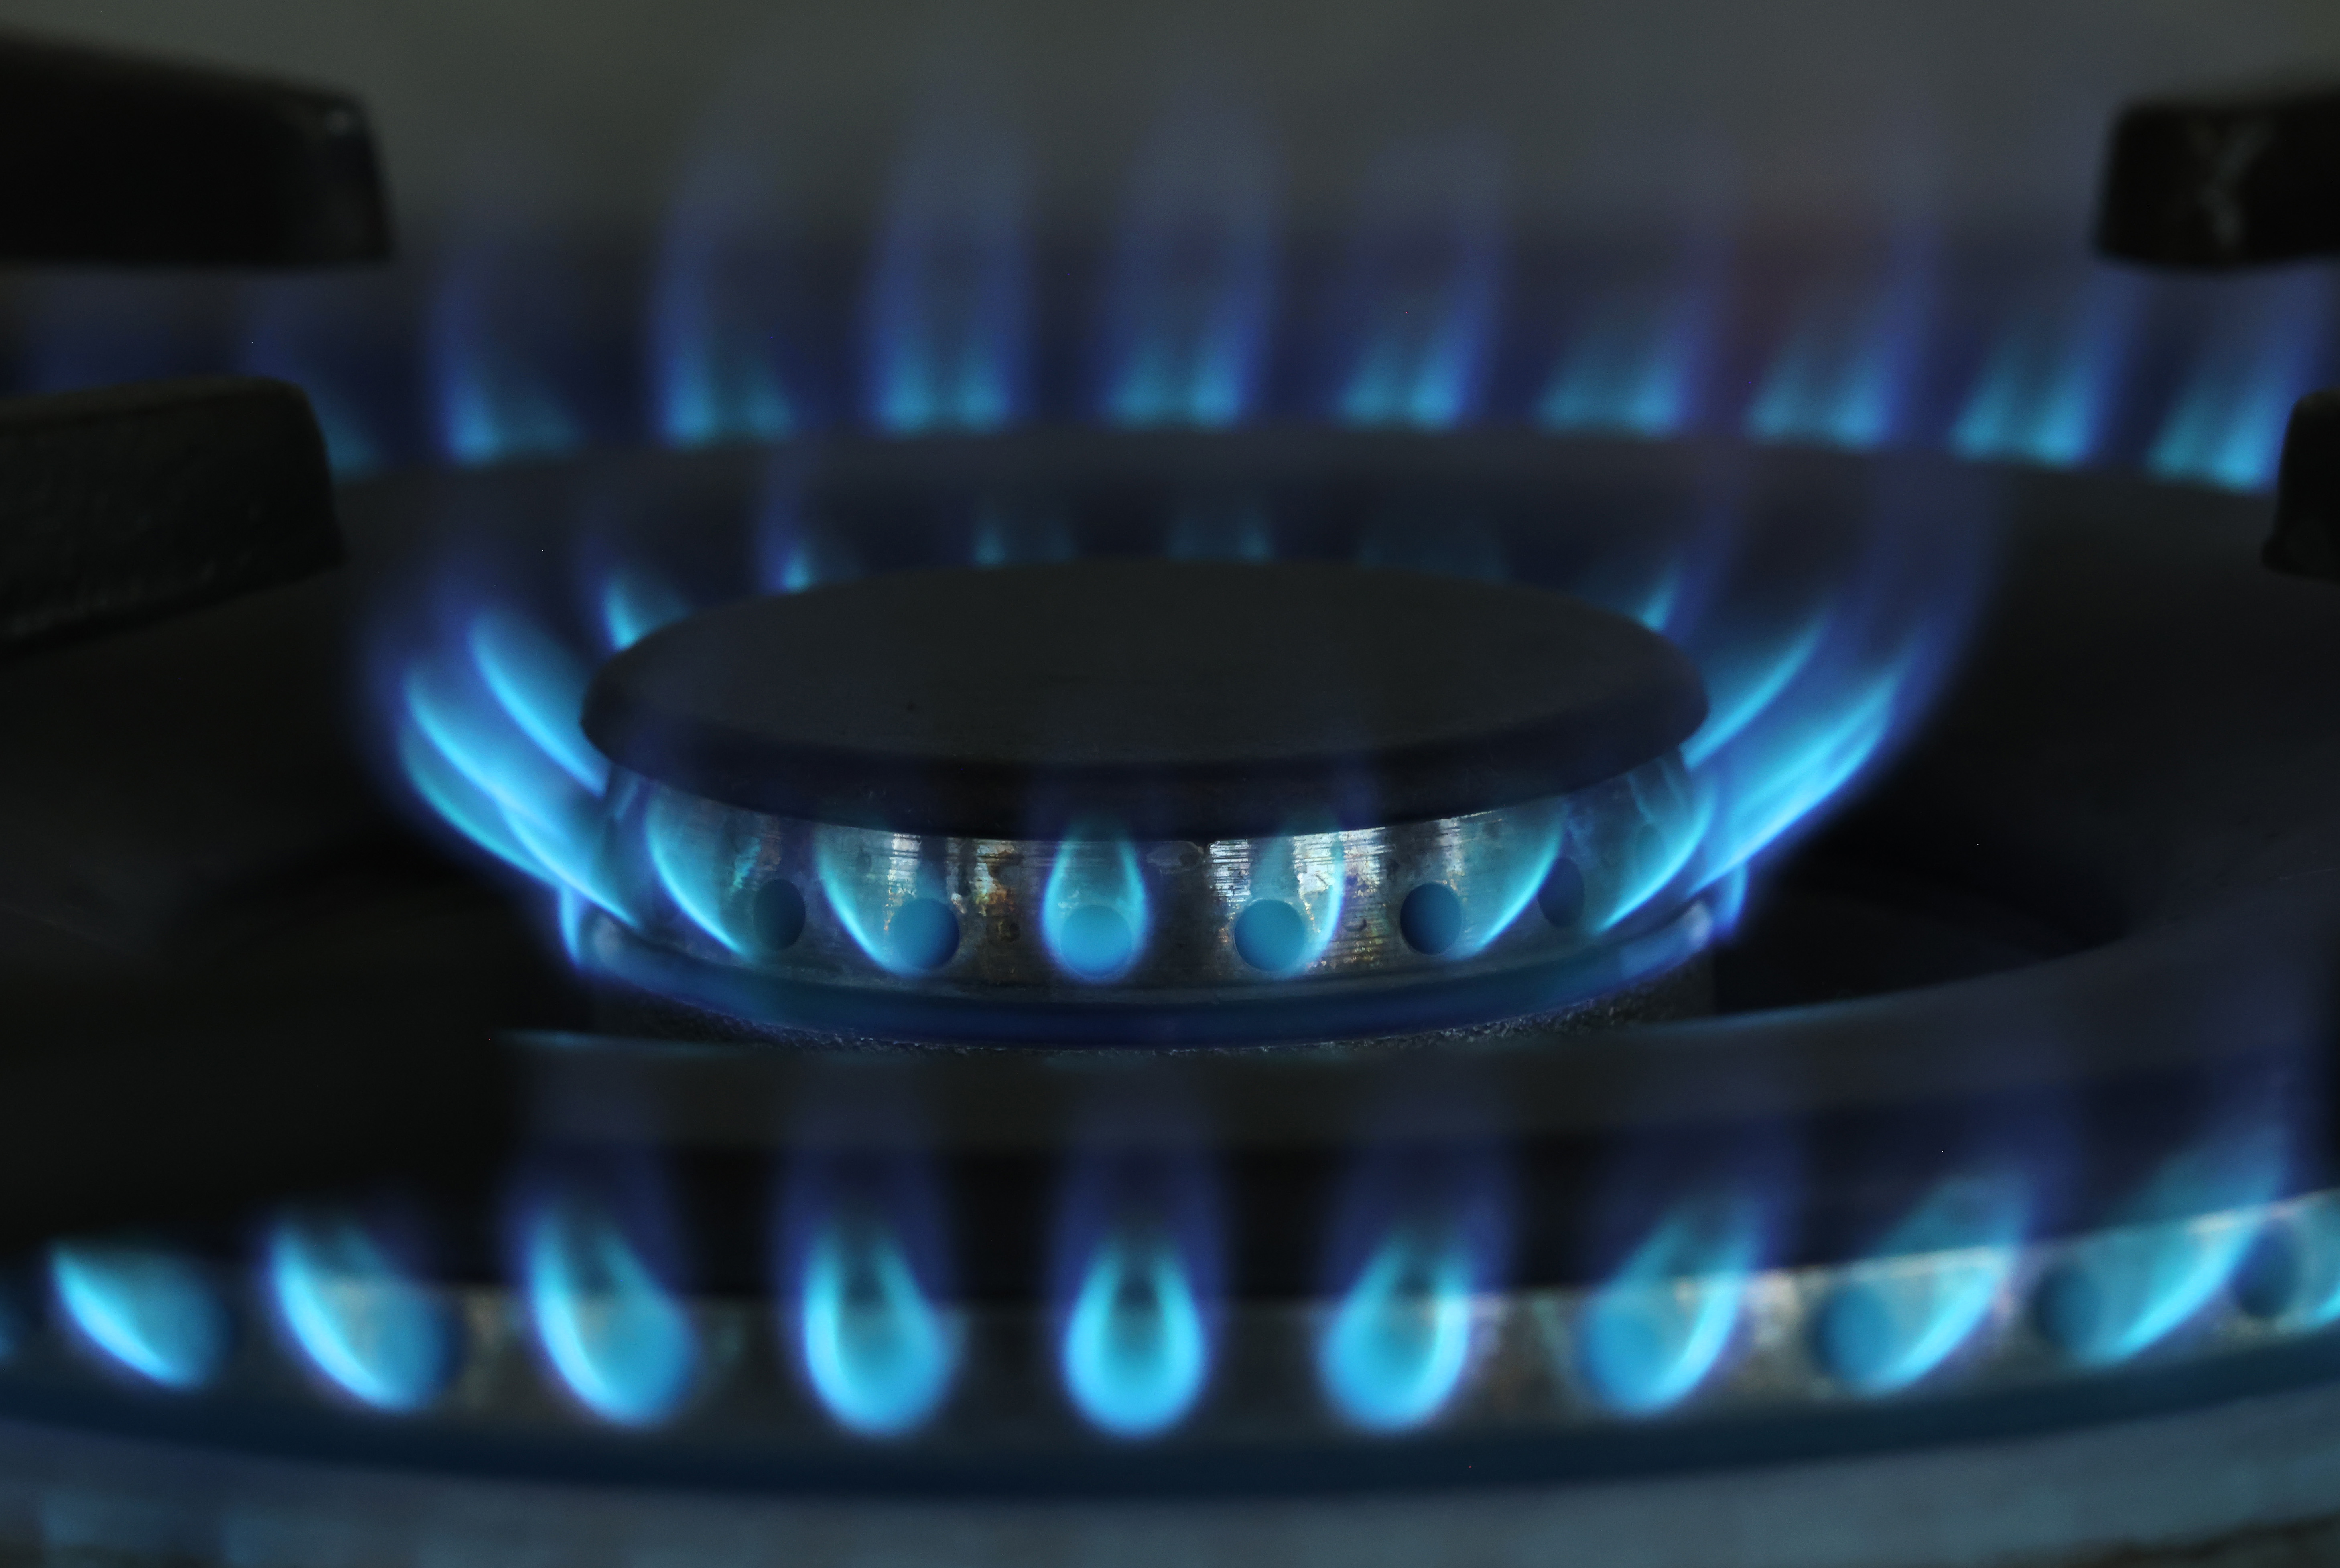 Gas stoves release methane and air pollution into the home - Vox